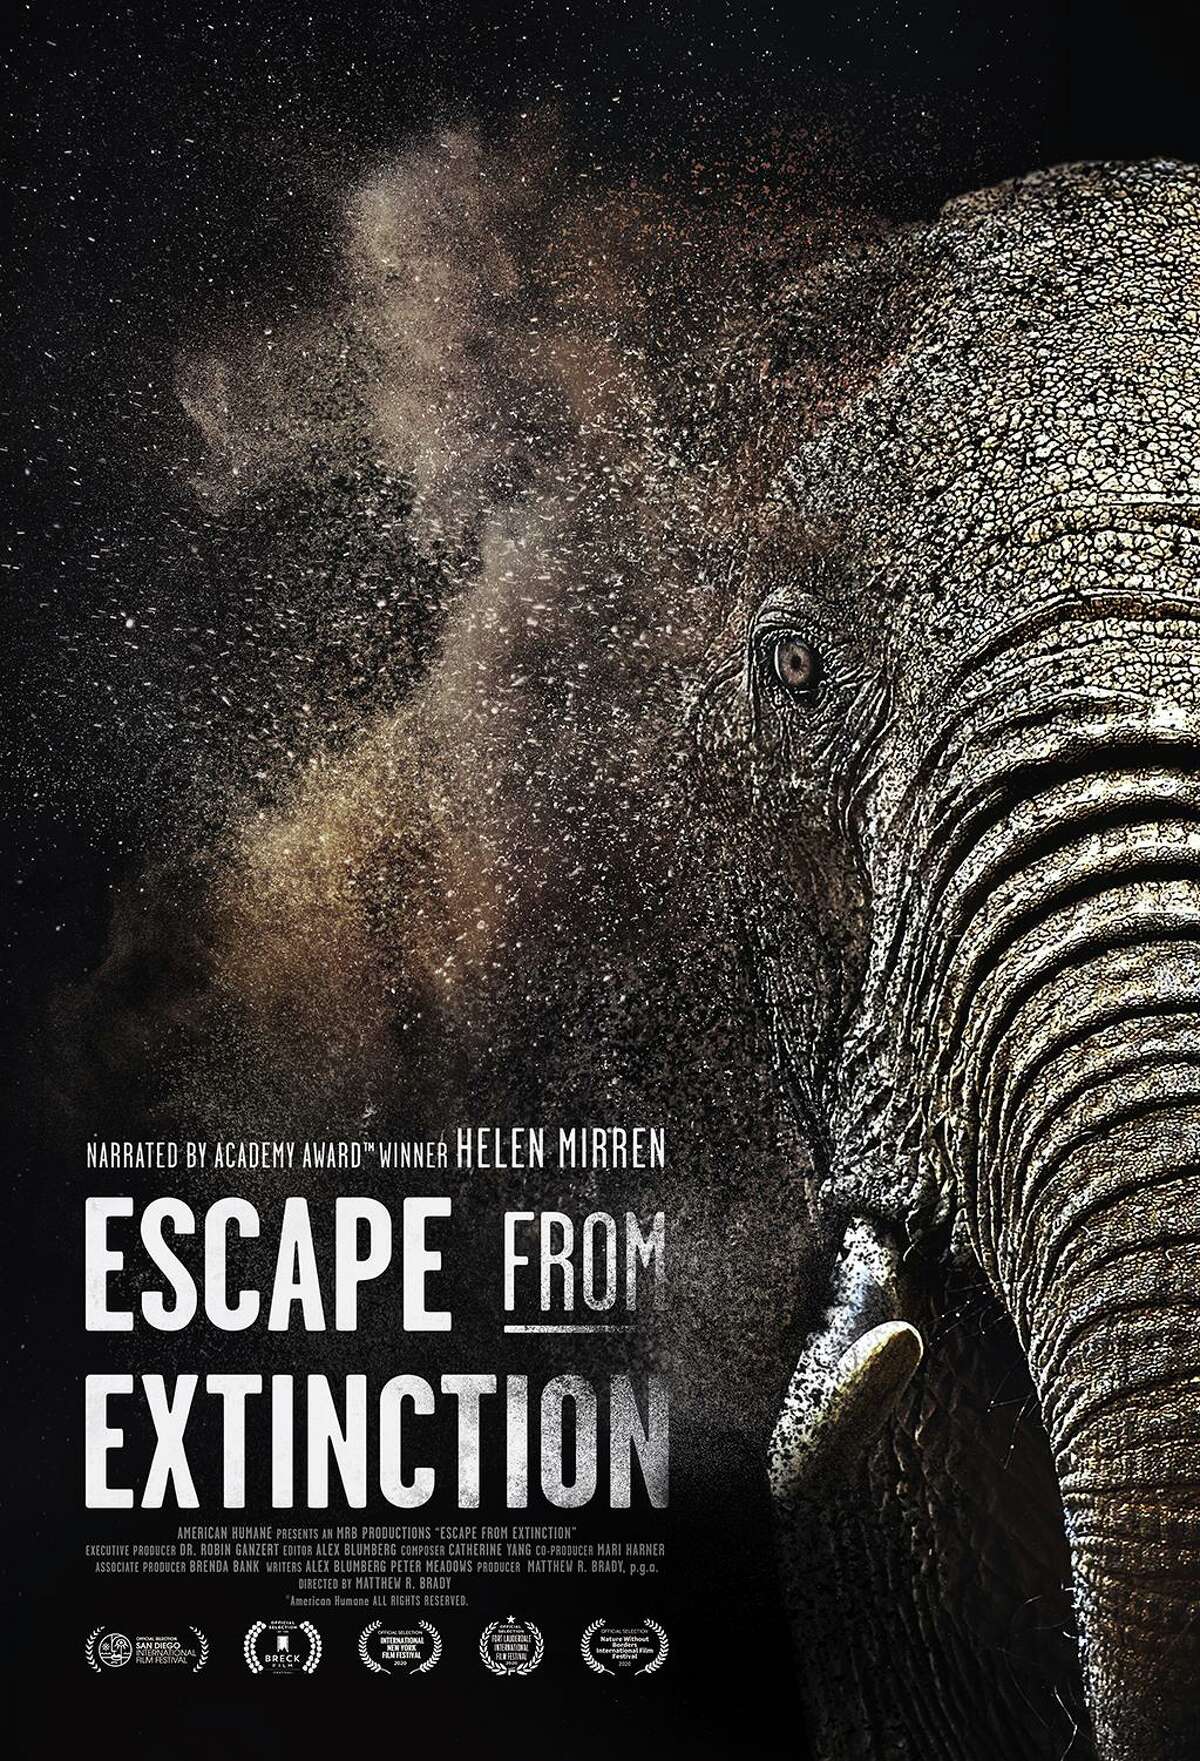 Matthew R. Brady, of Madison, has directed and produced the documentary 'Escape From Extinction,' narrated by Dame Helen Mirren. The movie will be opening in Mystic at the Cinepolis and Mystic Luxury Cinemas on Oct. 16.